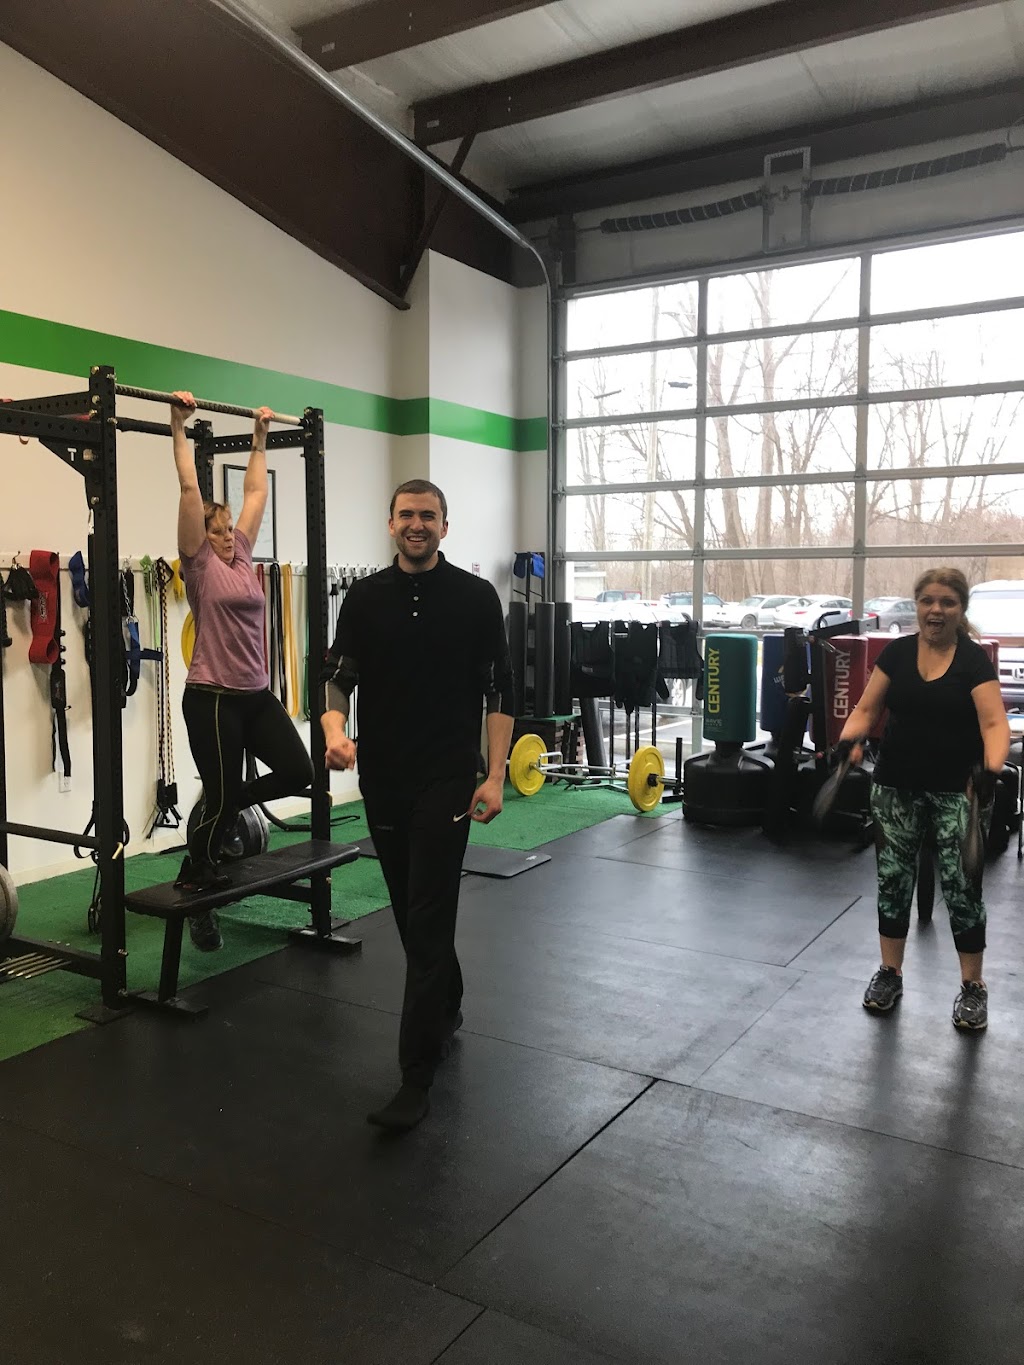 Loveland Strength and Fitness | 5 Wilcox Hill Rd, Portland, CT 06480 | Phone: (860) 365-5911